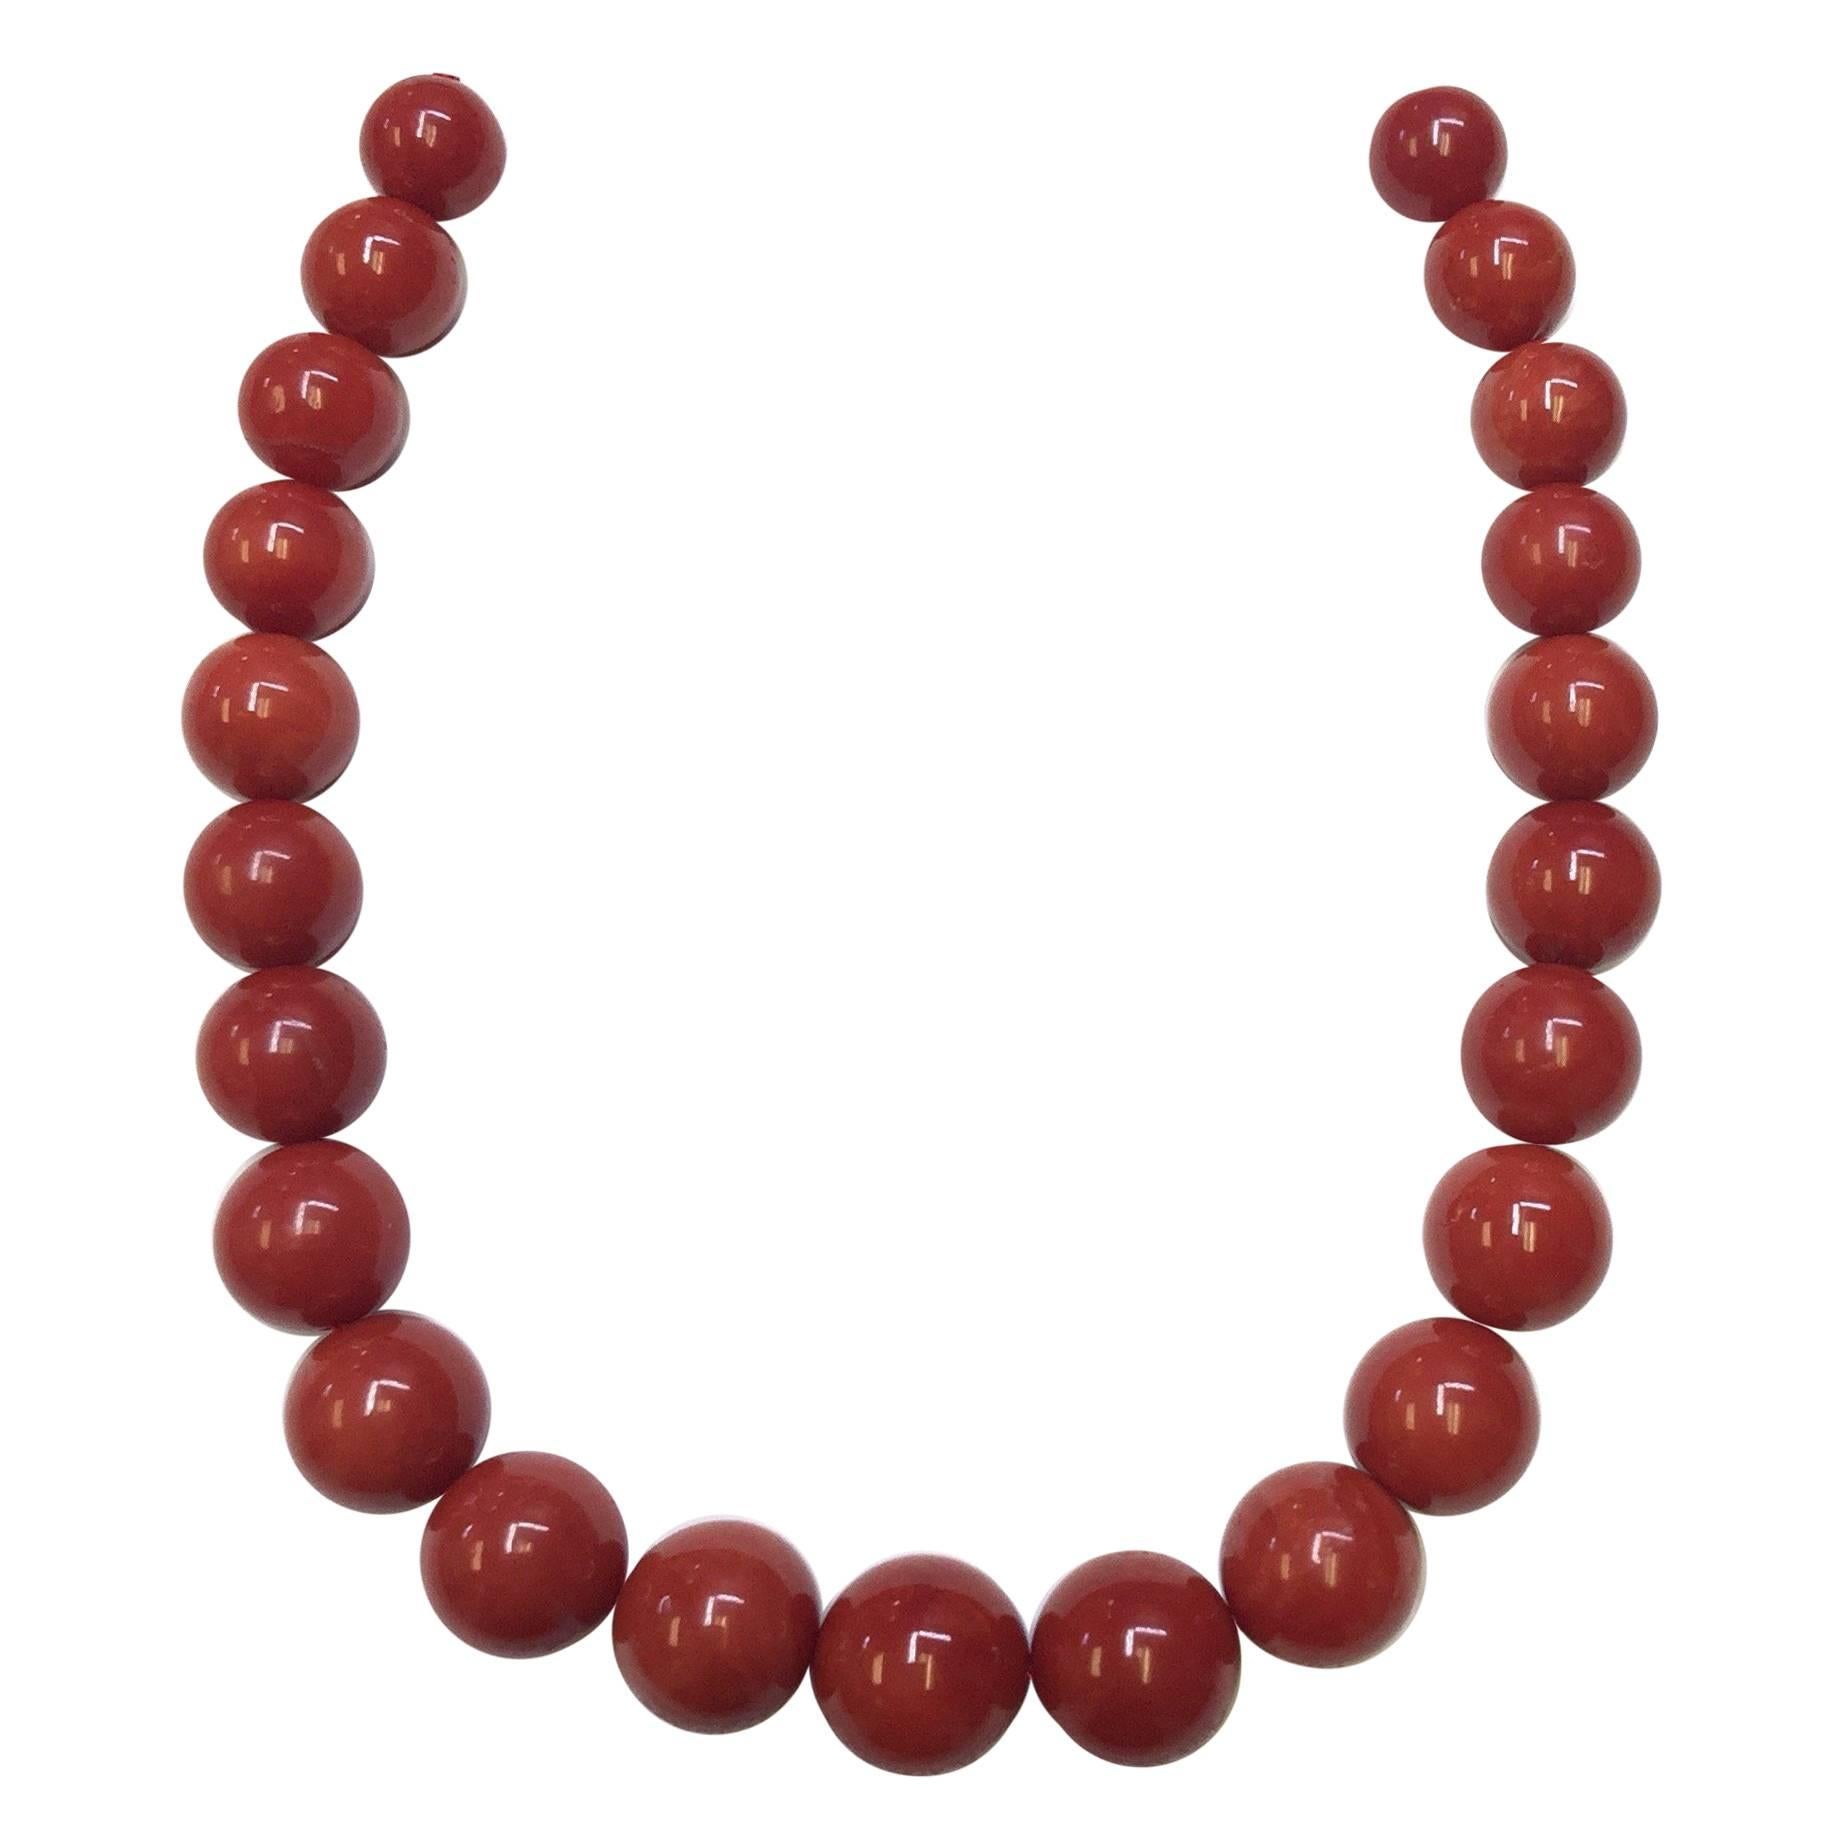 Strand of 23 Coral Beads